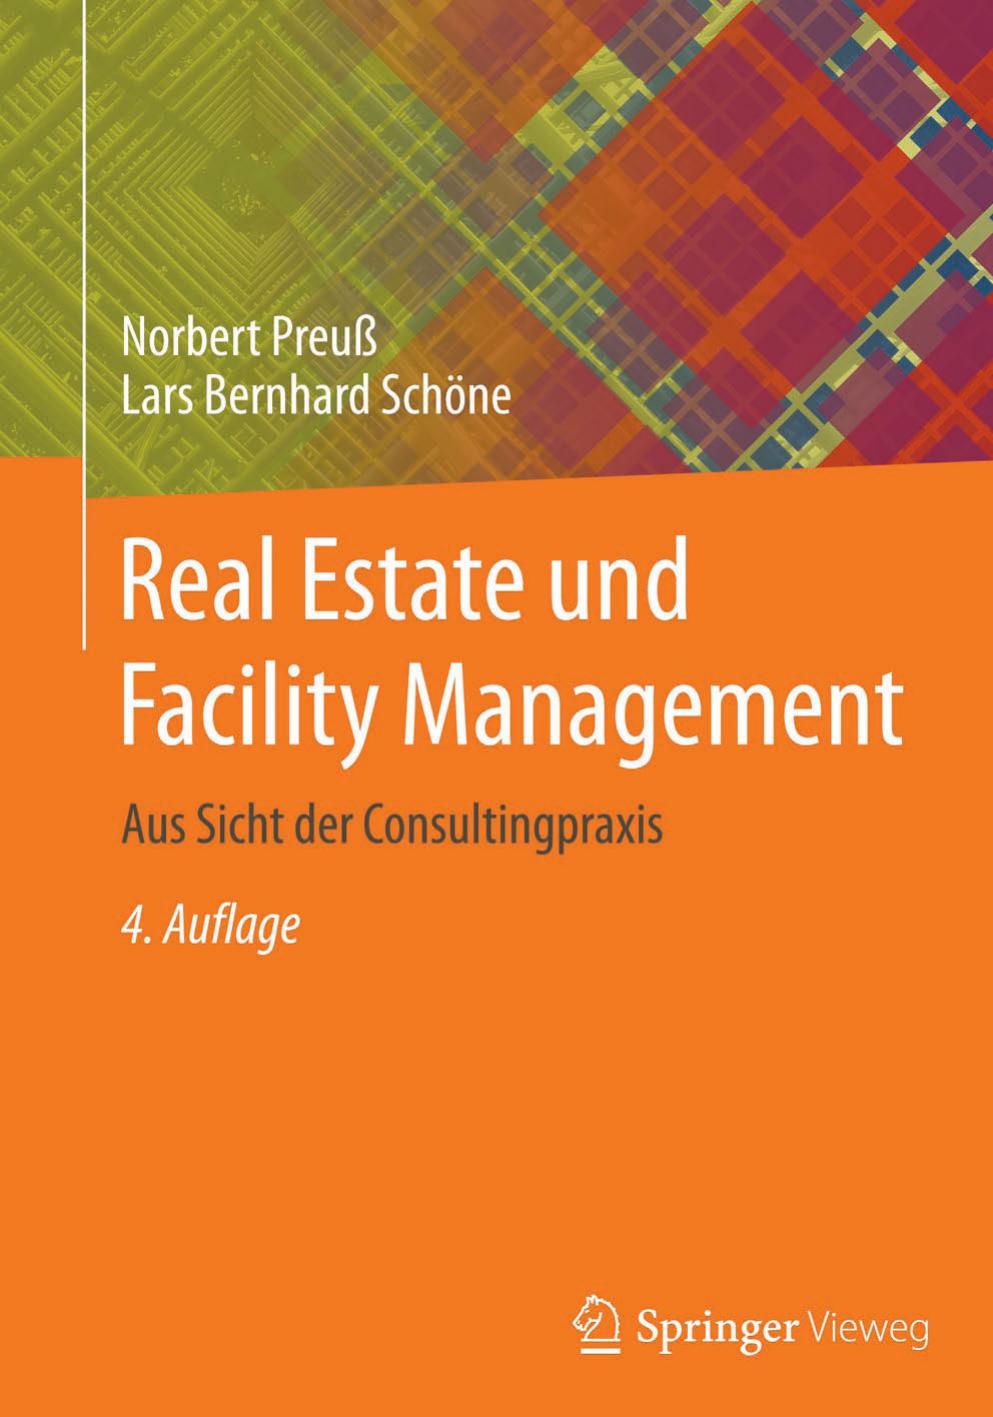 Real Estate und Facility Management 2016